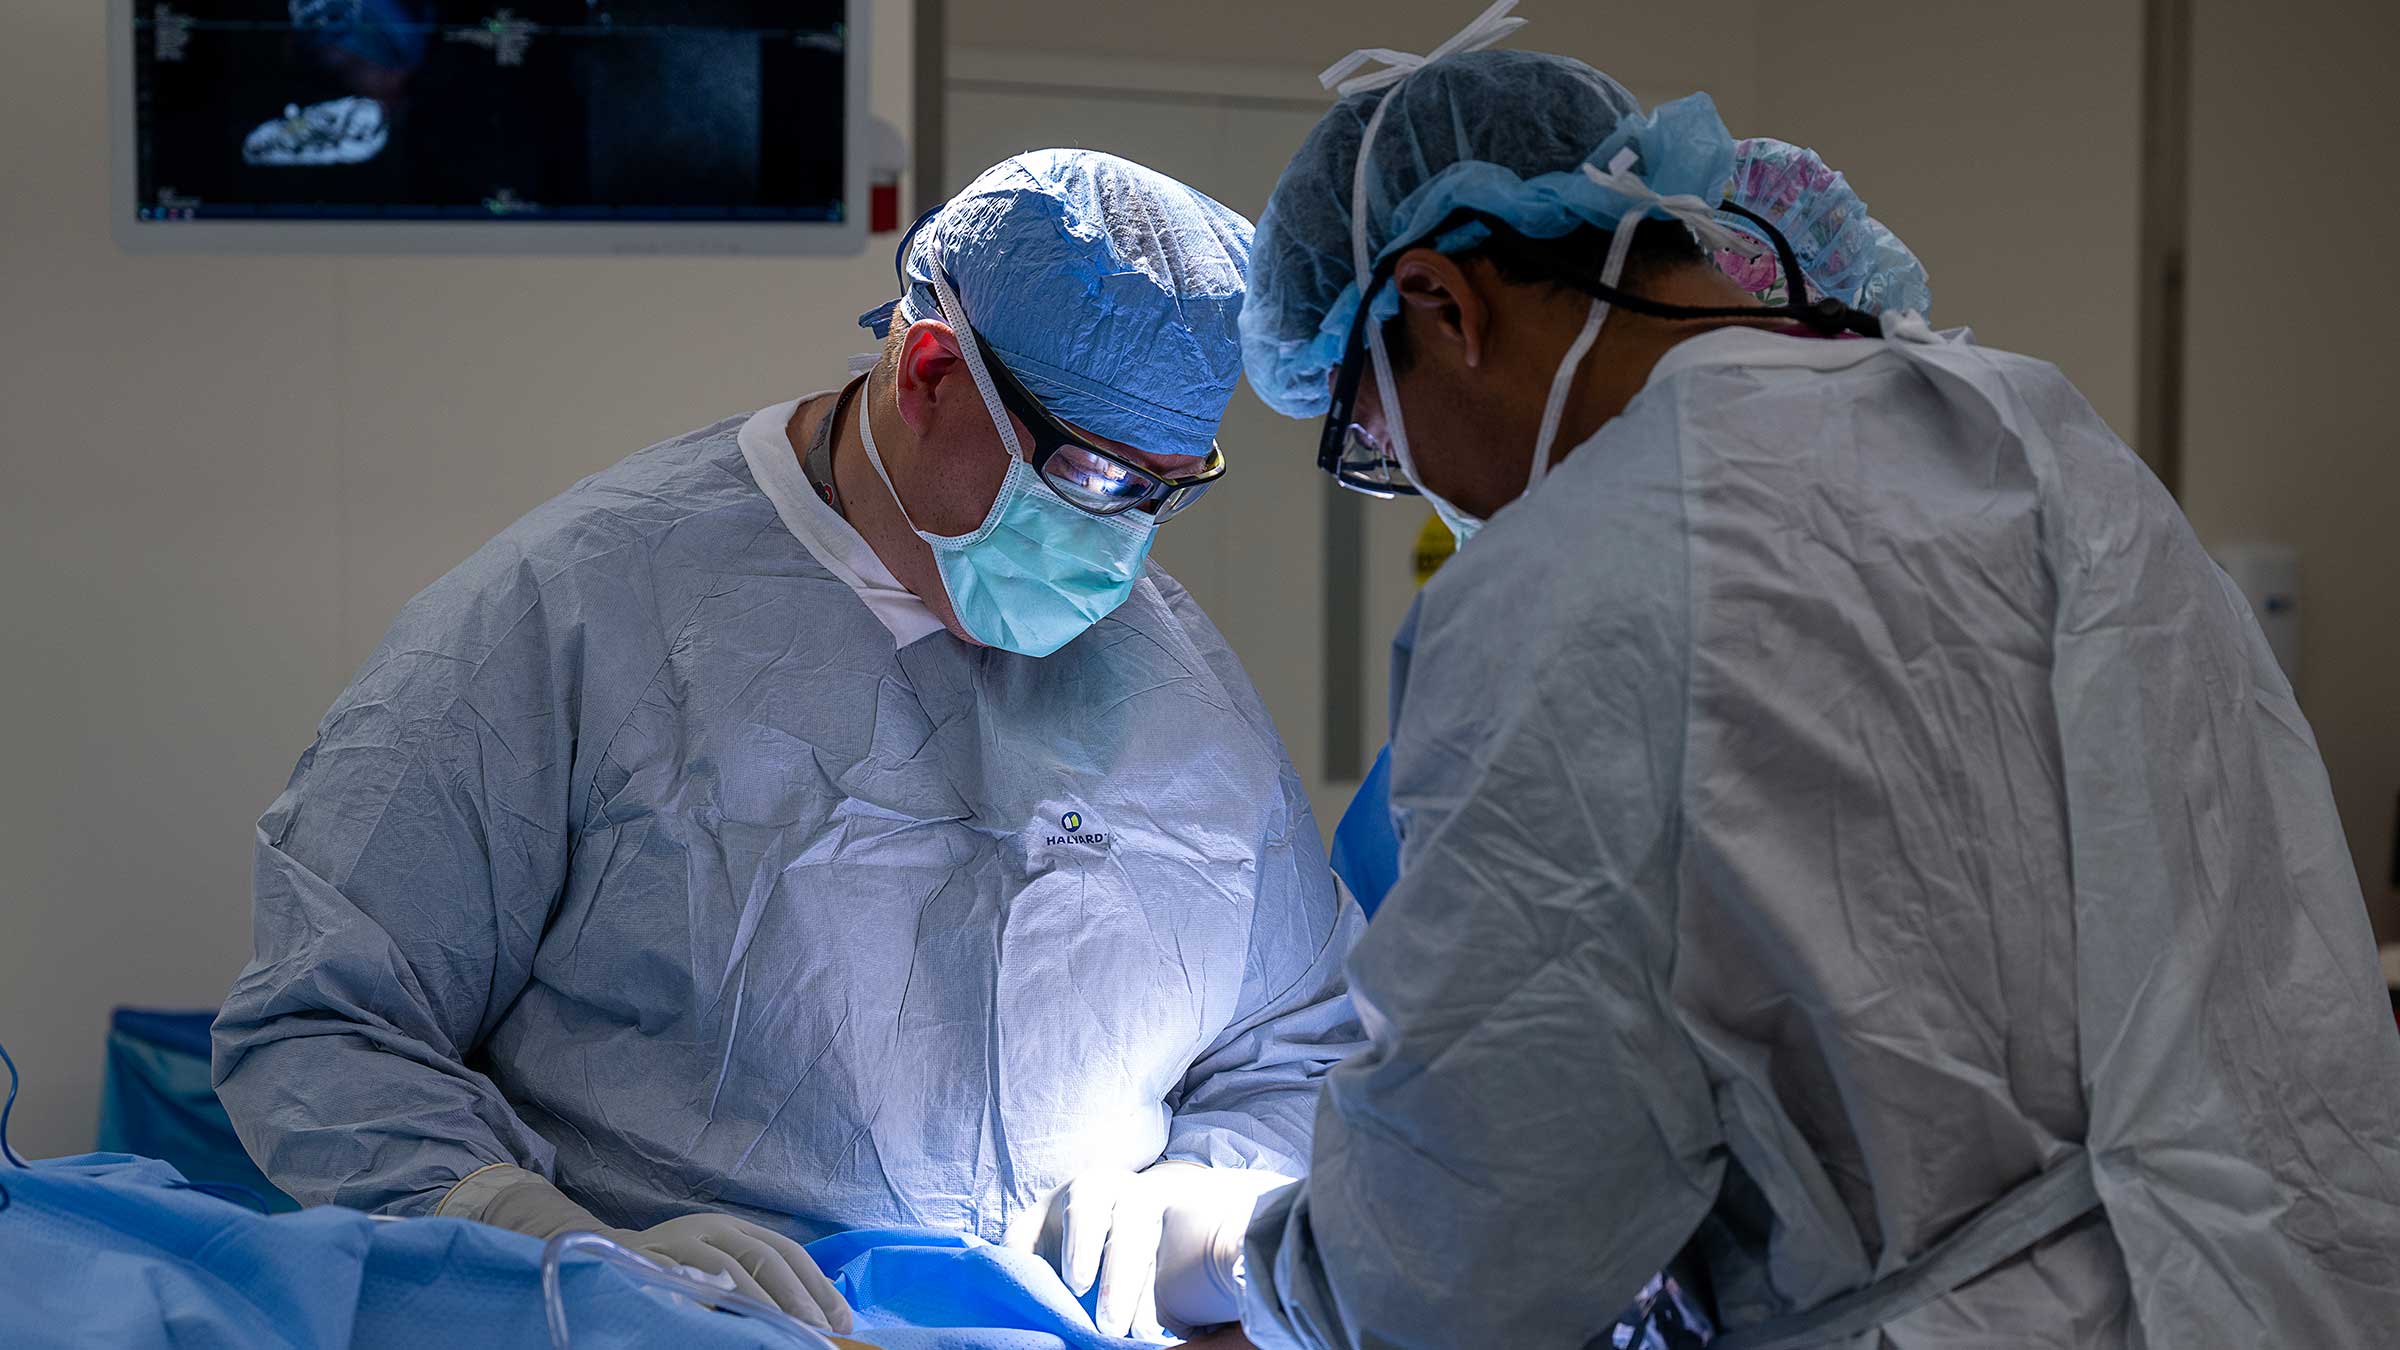 Dr. Mayerson performing a surgery